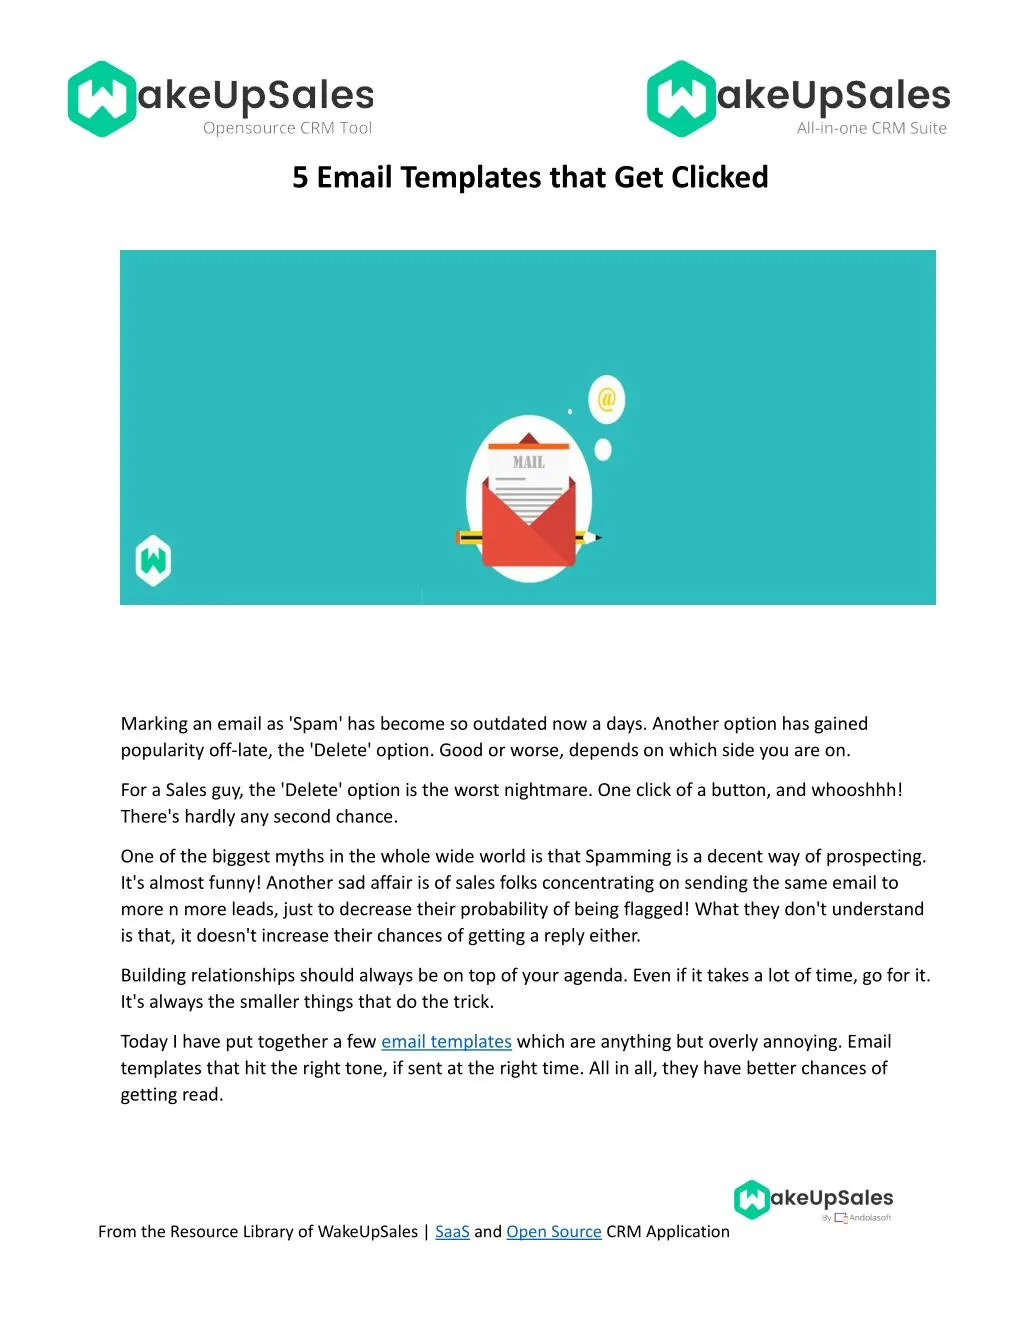 5 email templates that get clicked